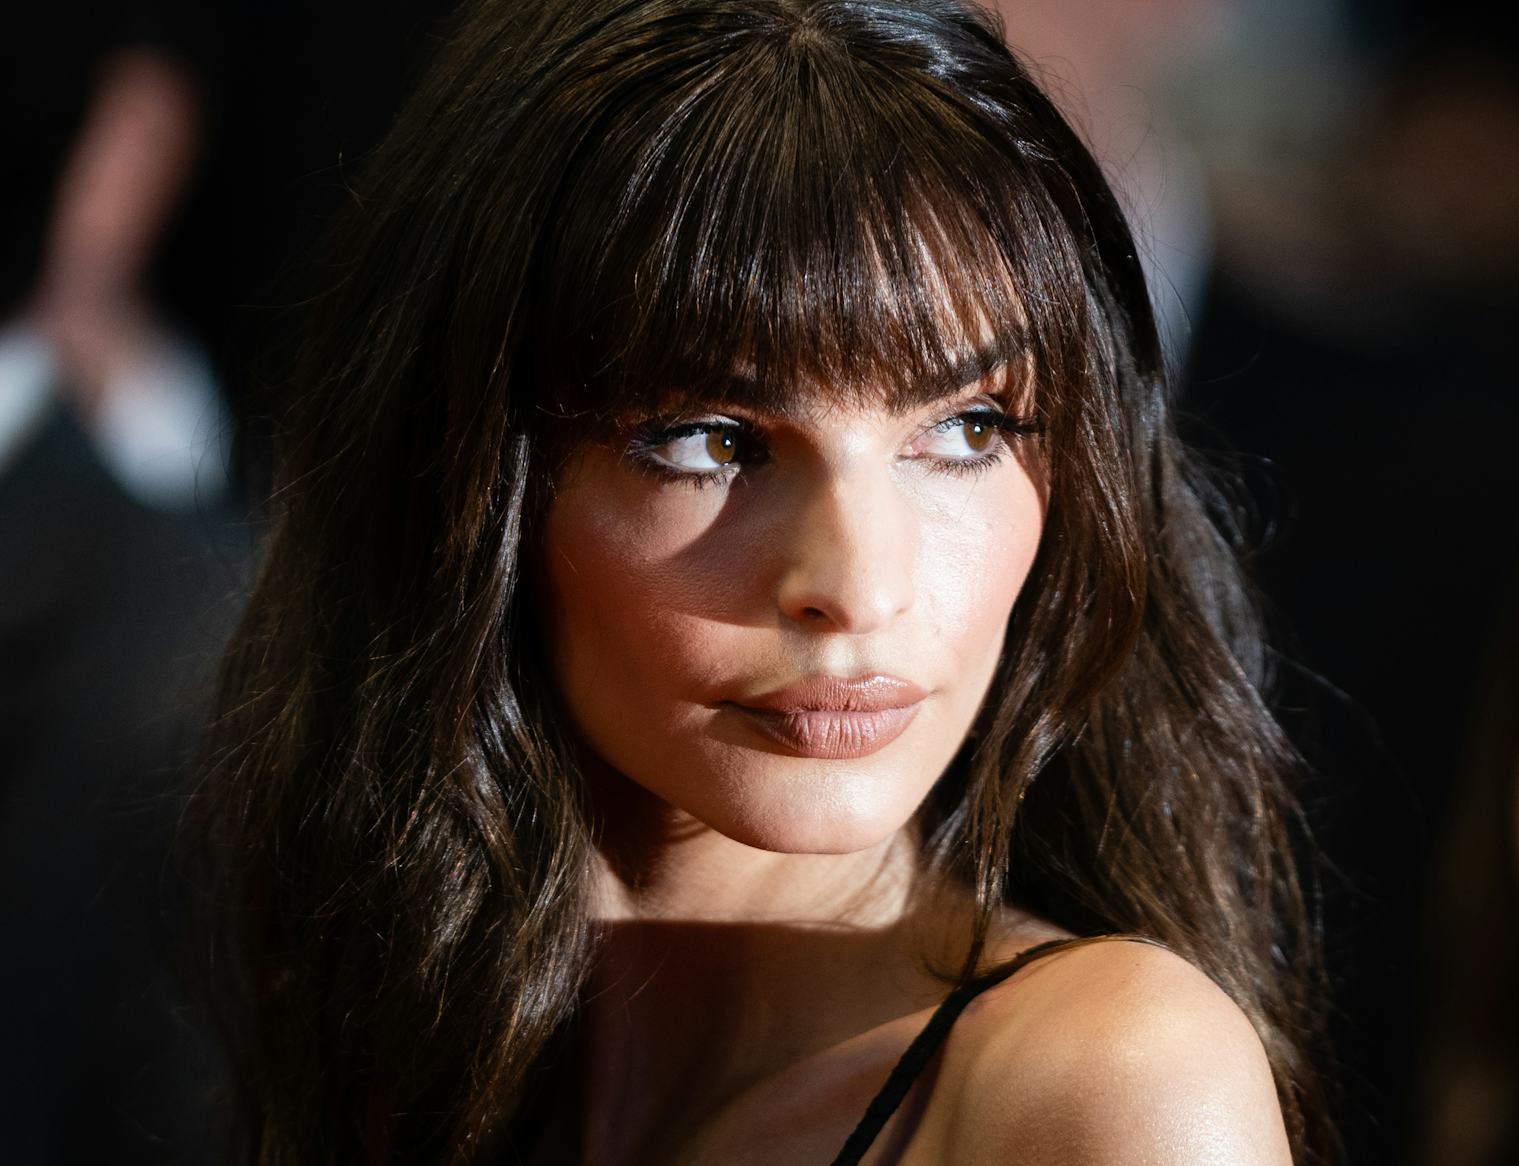 Emratas French Girl Fringe At Cannes Will Make You Want Summer Bangs